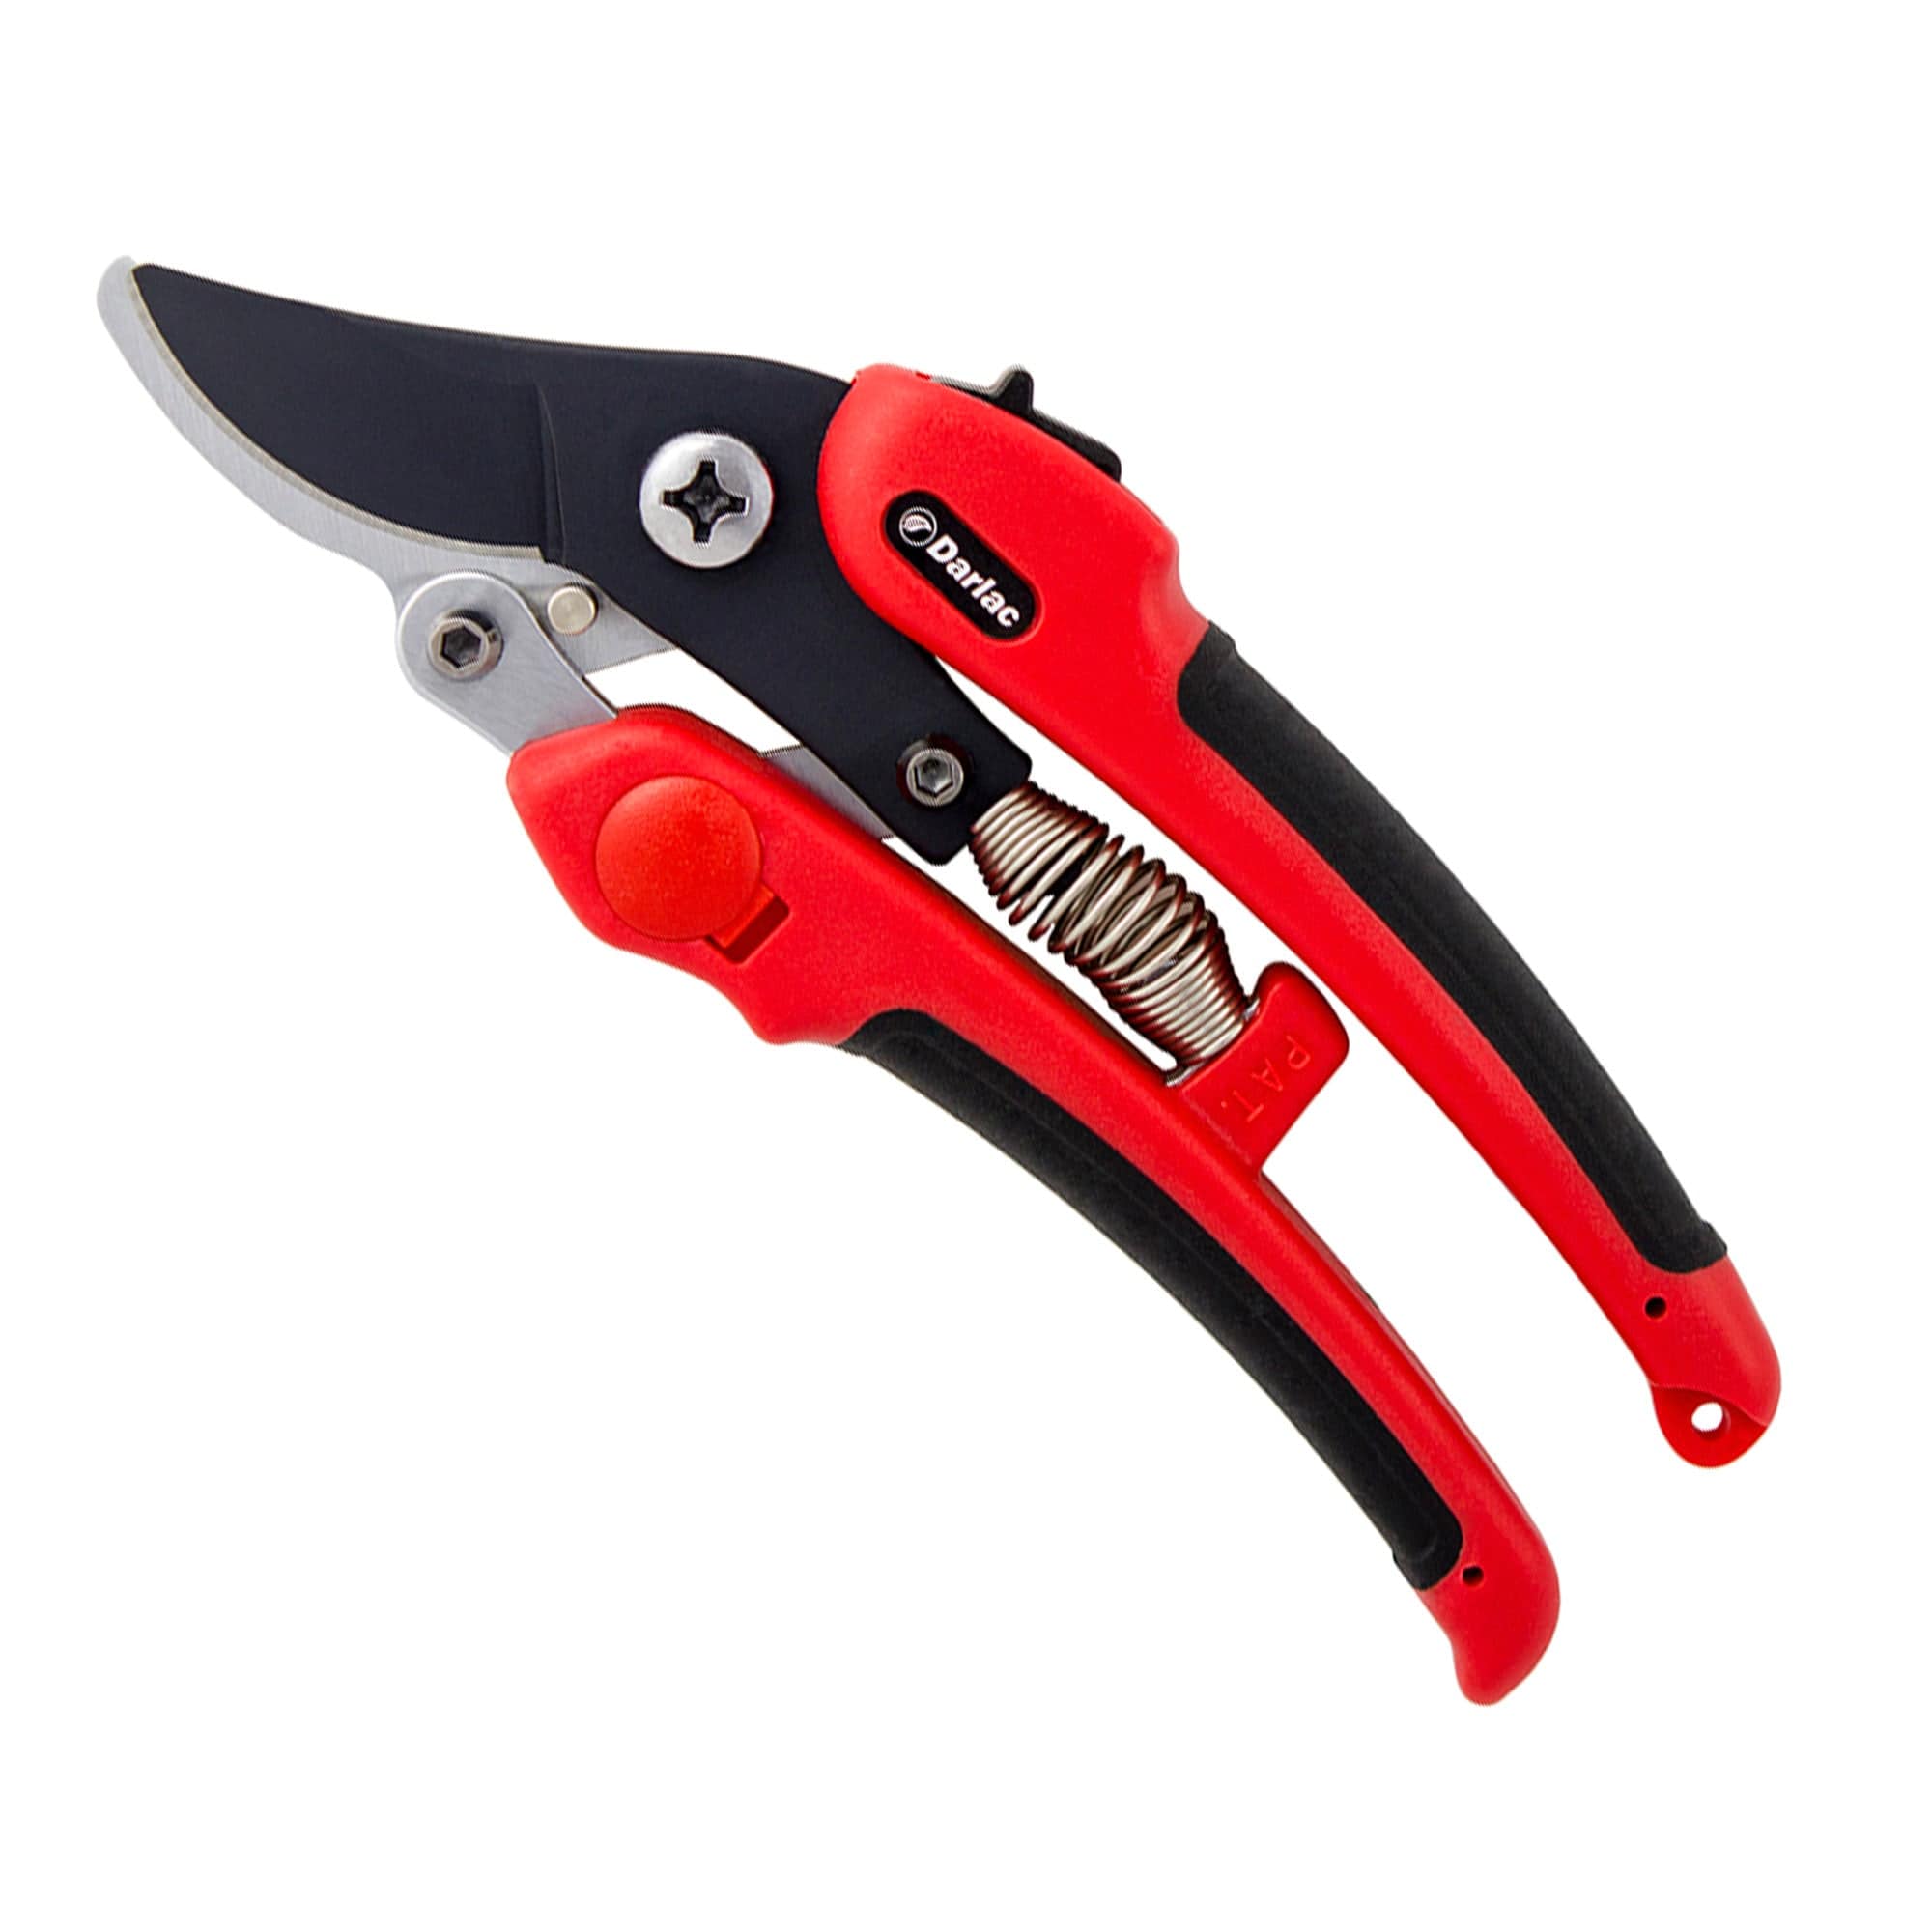 Darlac Compound Action Bypass Secateurs